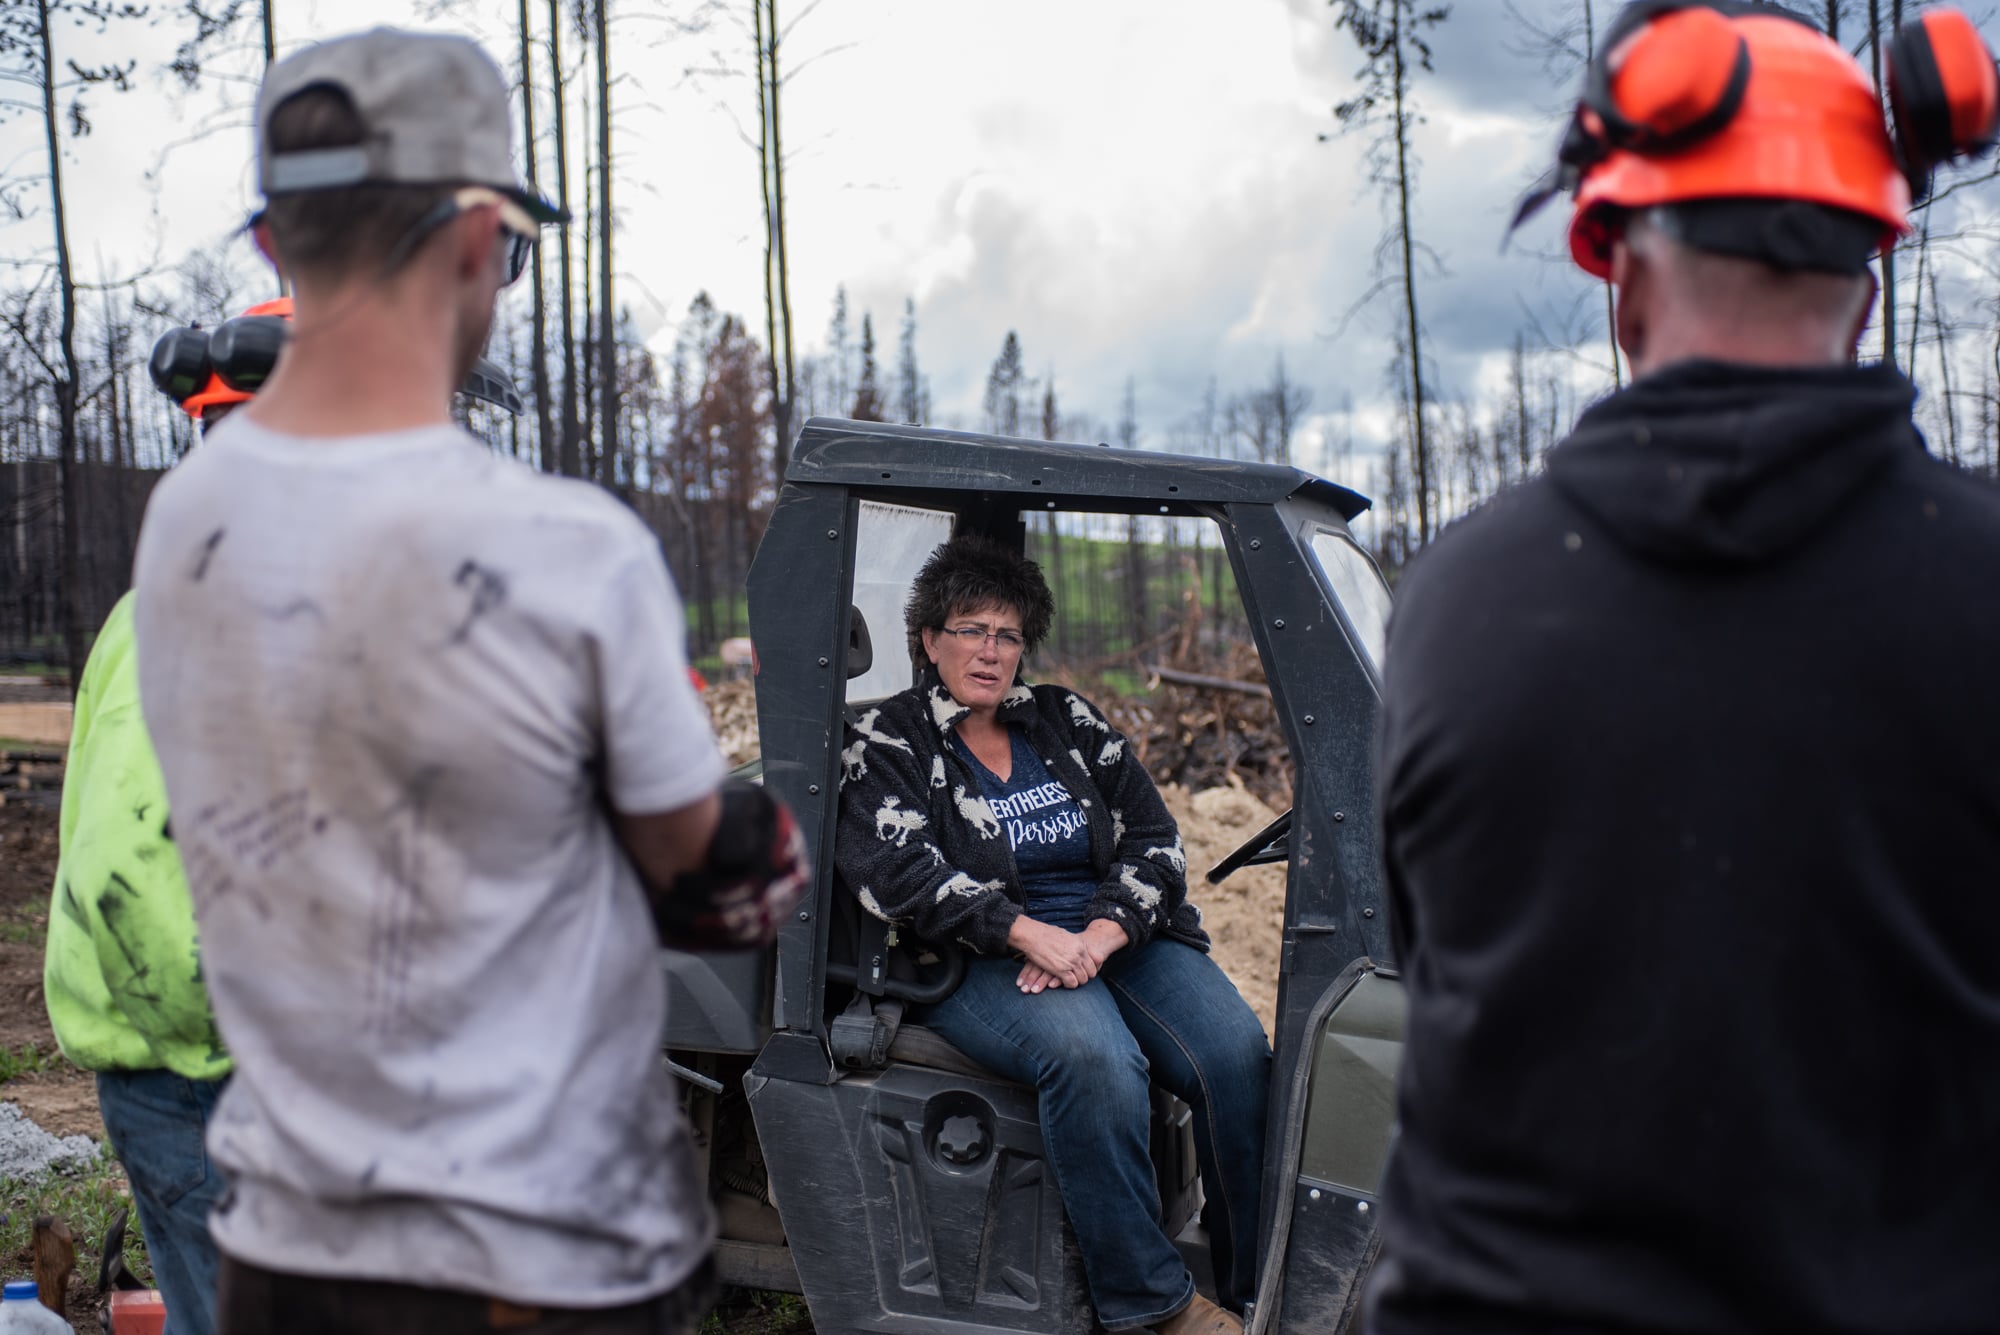 In the months after the Roosevelt Fire roared through Sublette County  last September, Andrea “Andie” Sramek of Hoback Ranches has organized multiple countywide cleanups to help cut down trees and sift through rubble from the fire, which destroyed 55 homes. (Dustin Patar/News21)